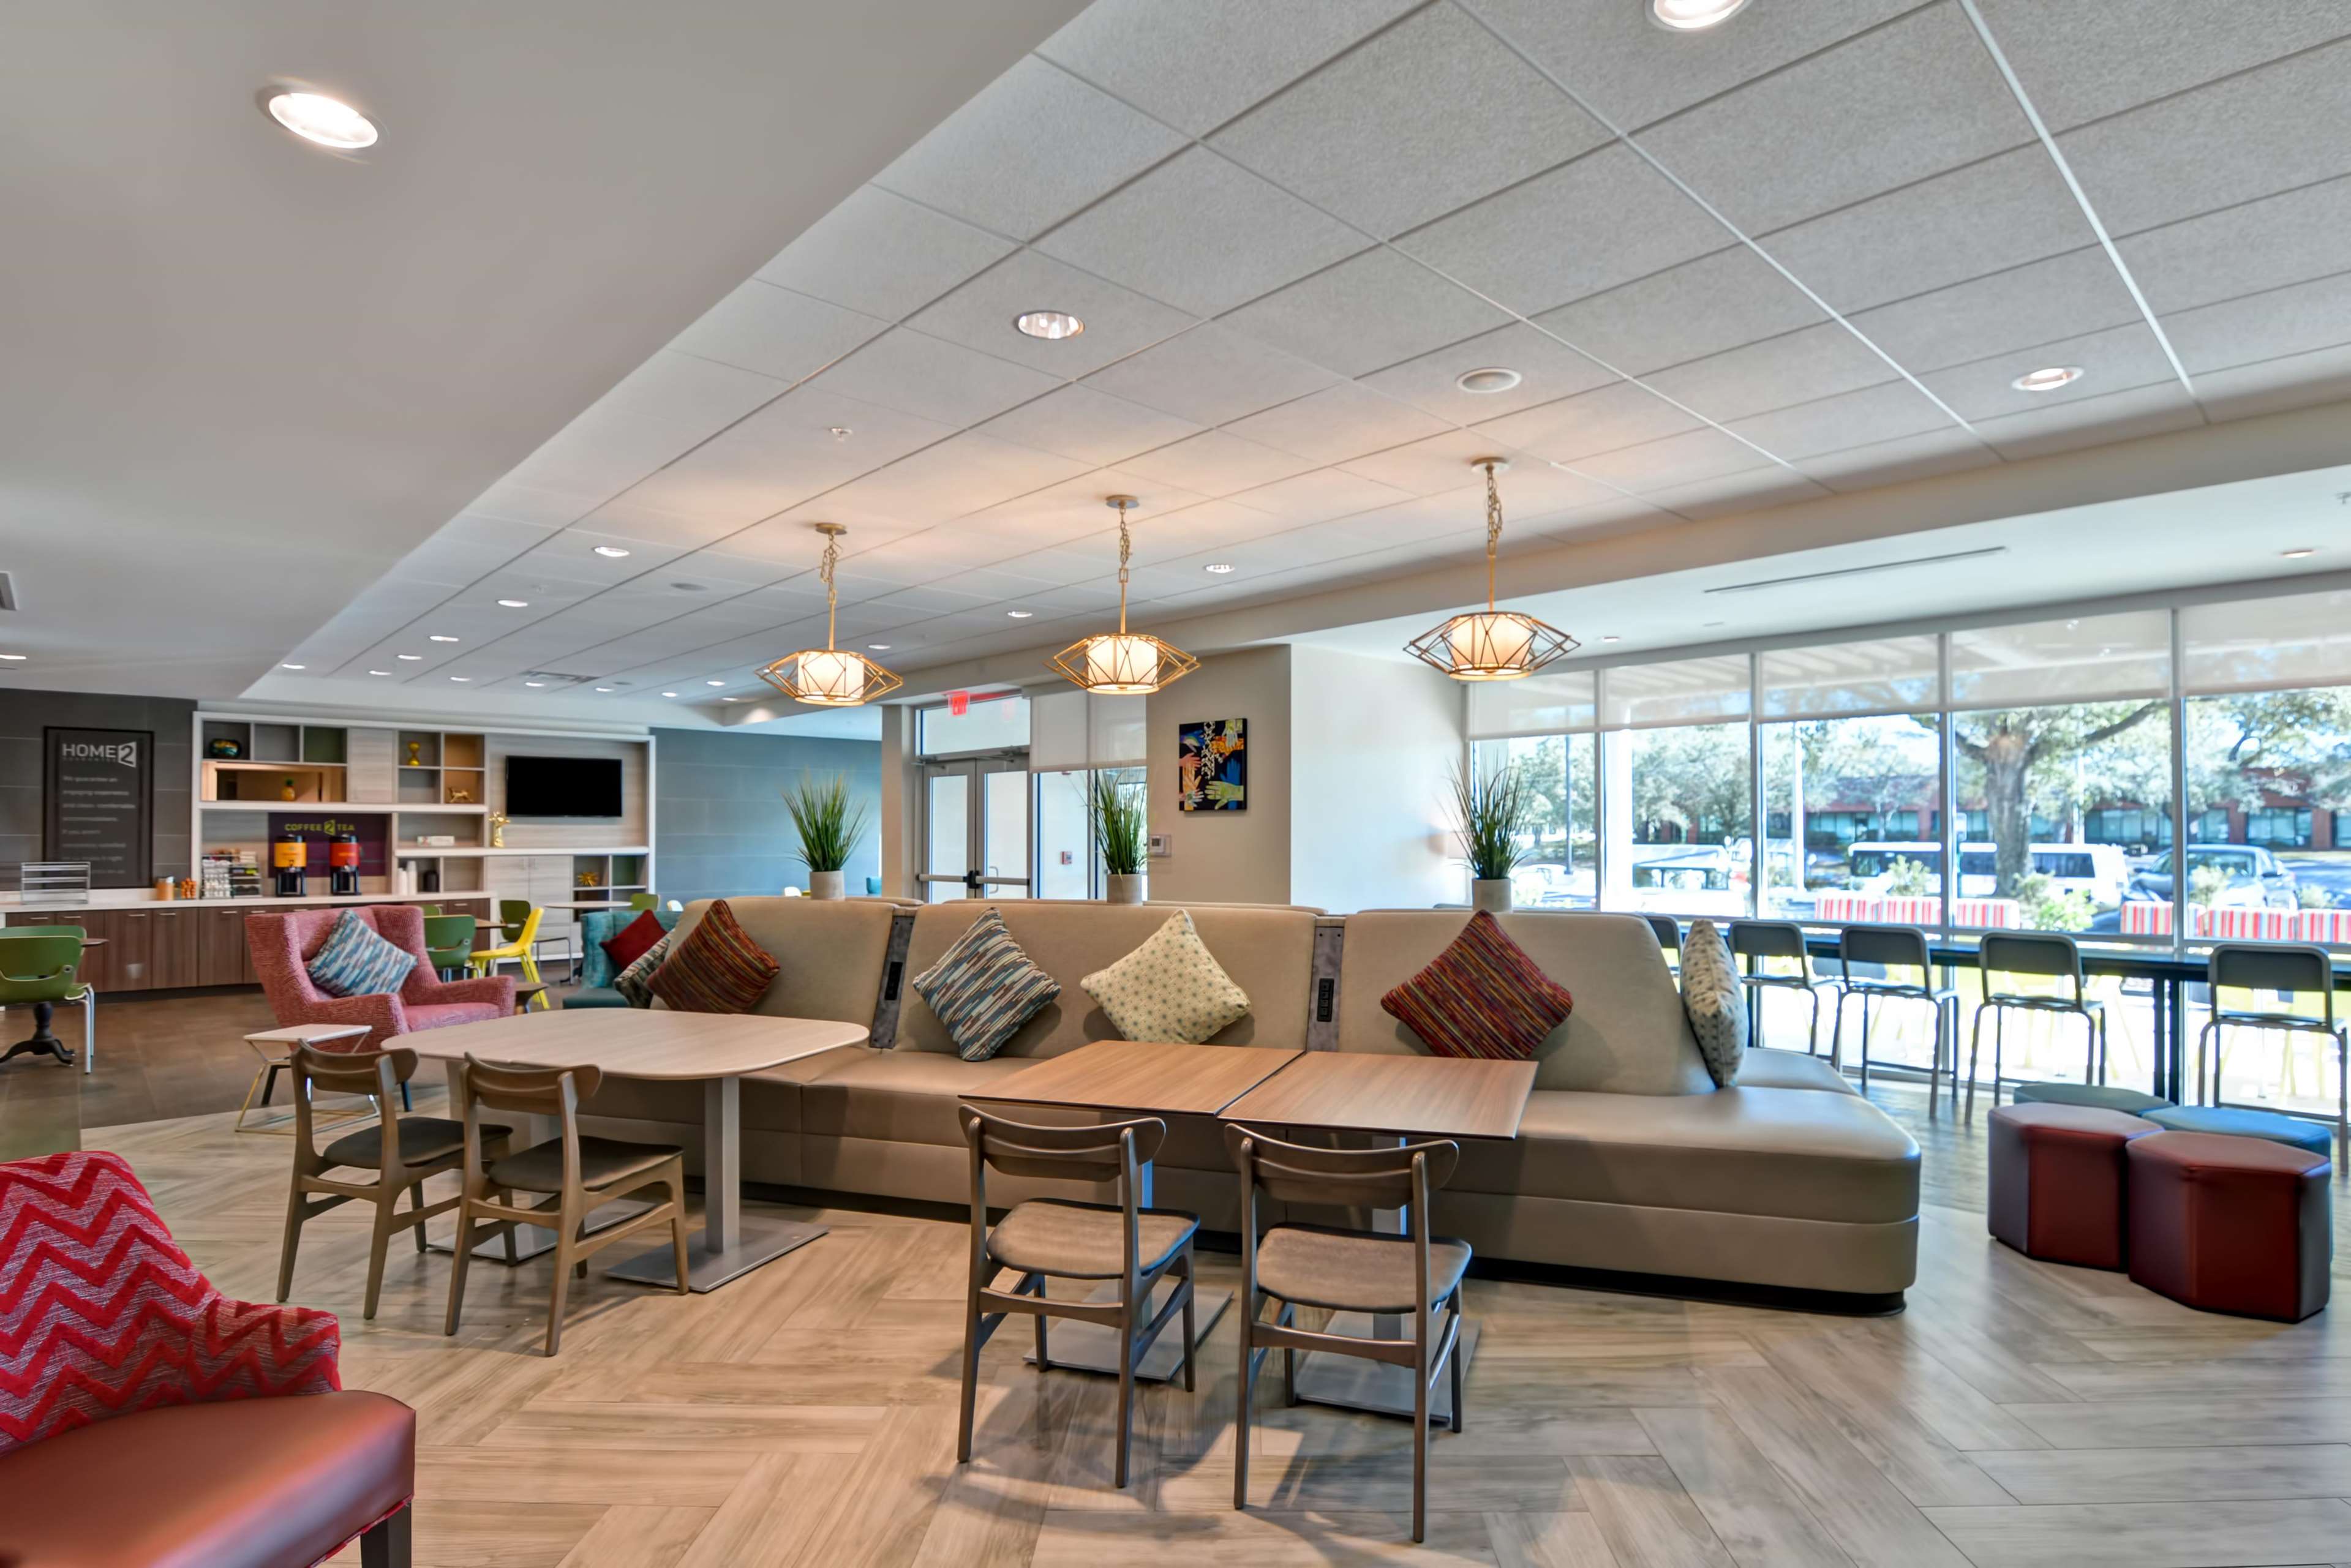 Home2 Suites by Hilton Tampa USF Near Busch Gardens Photo